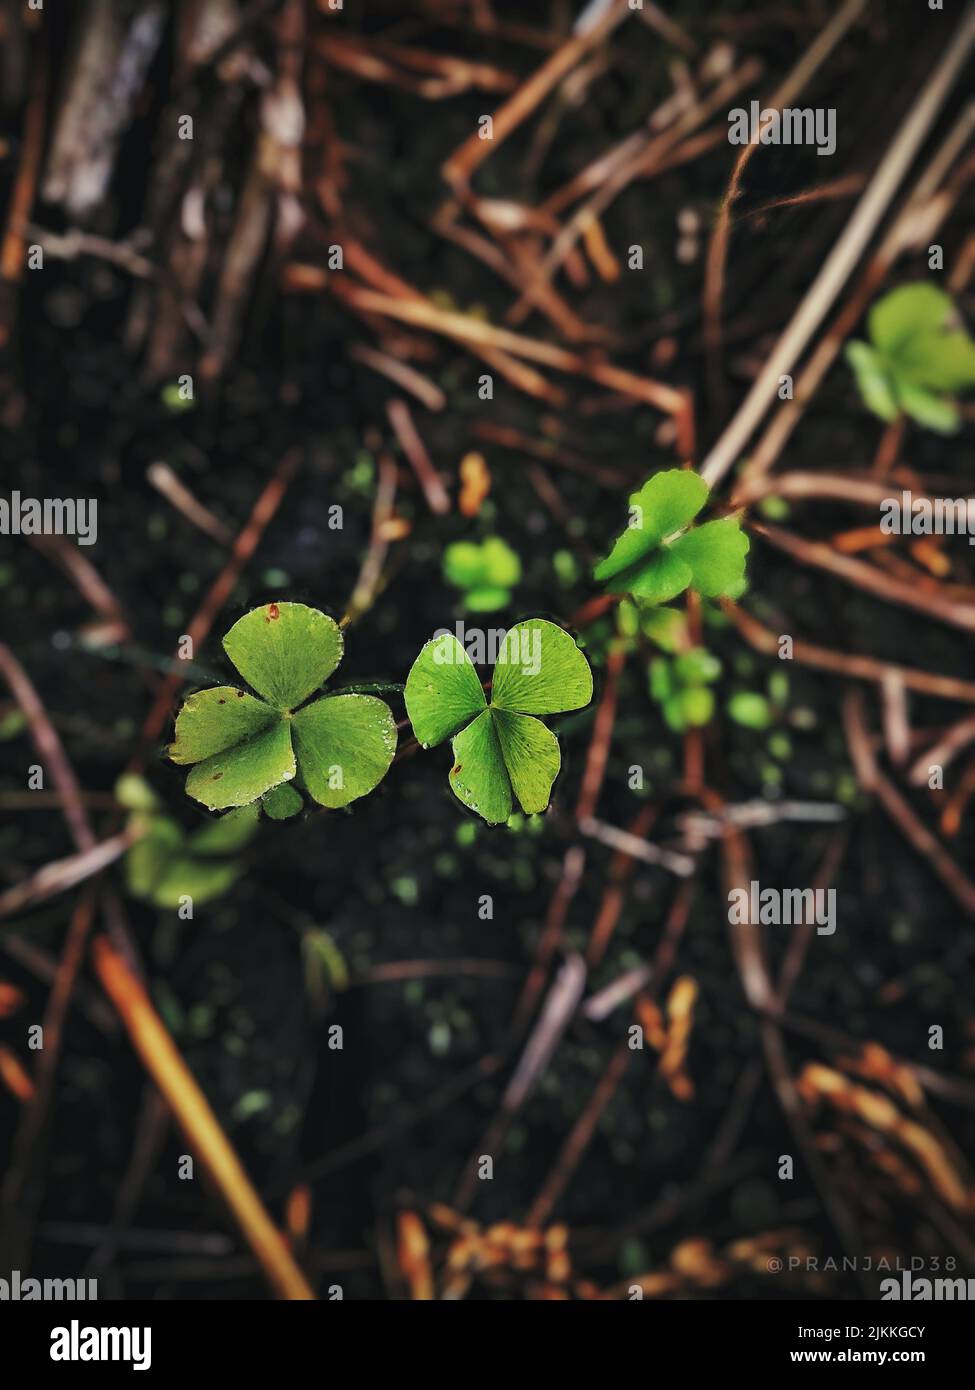 A closeup shot of a four-leaf clover in a background of brown branches Stock Photo